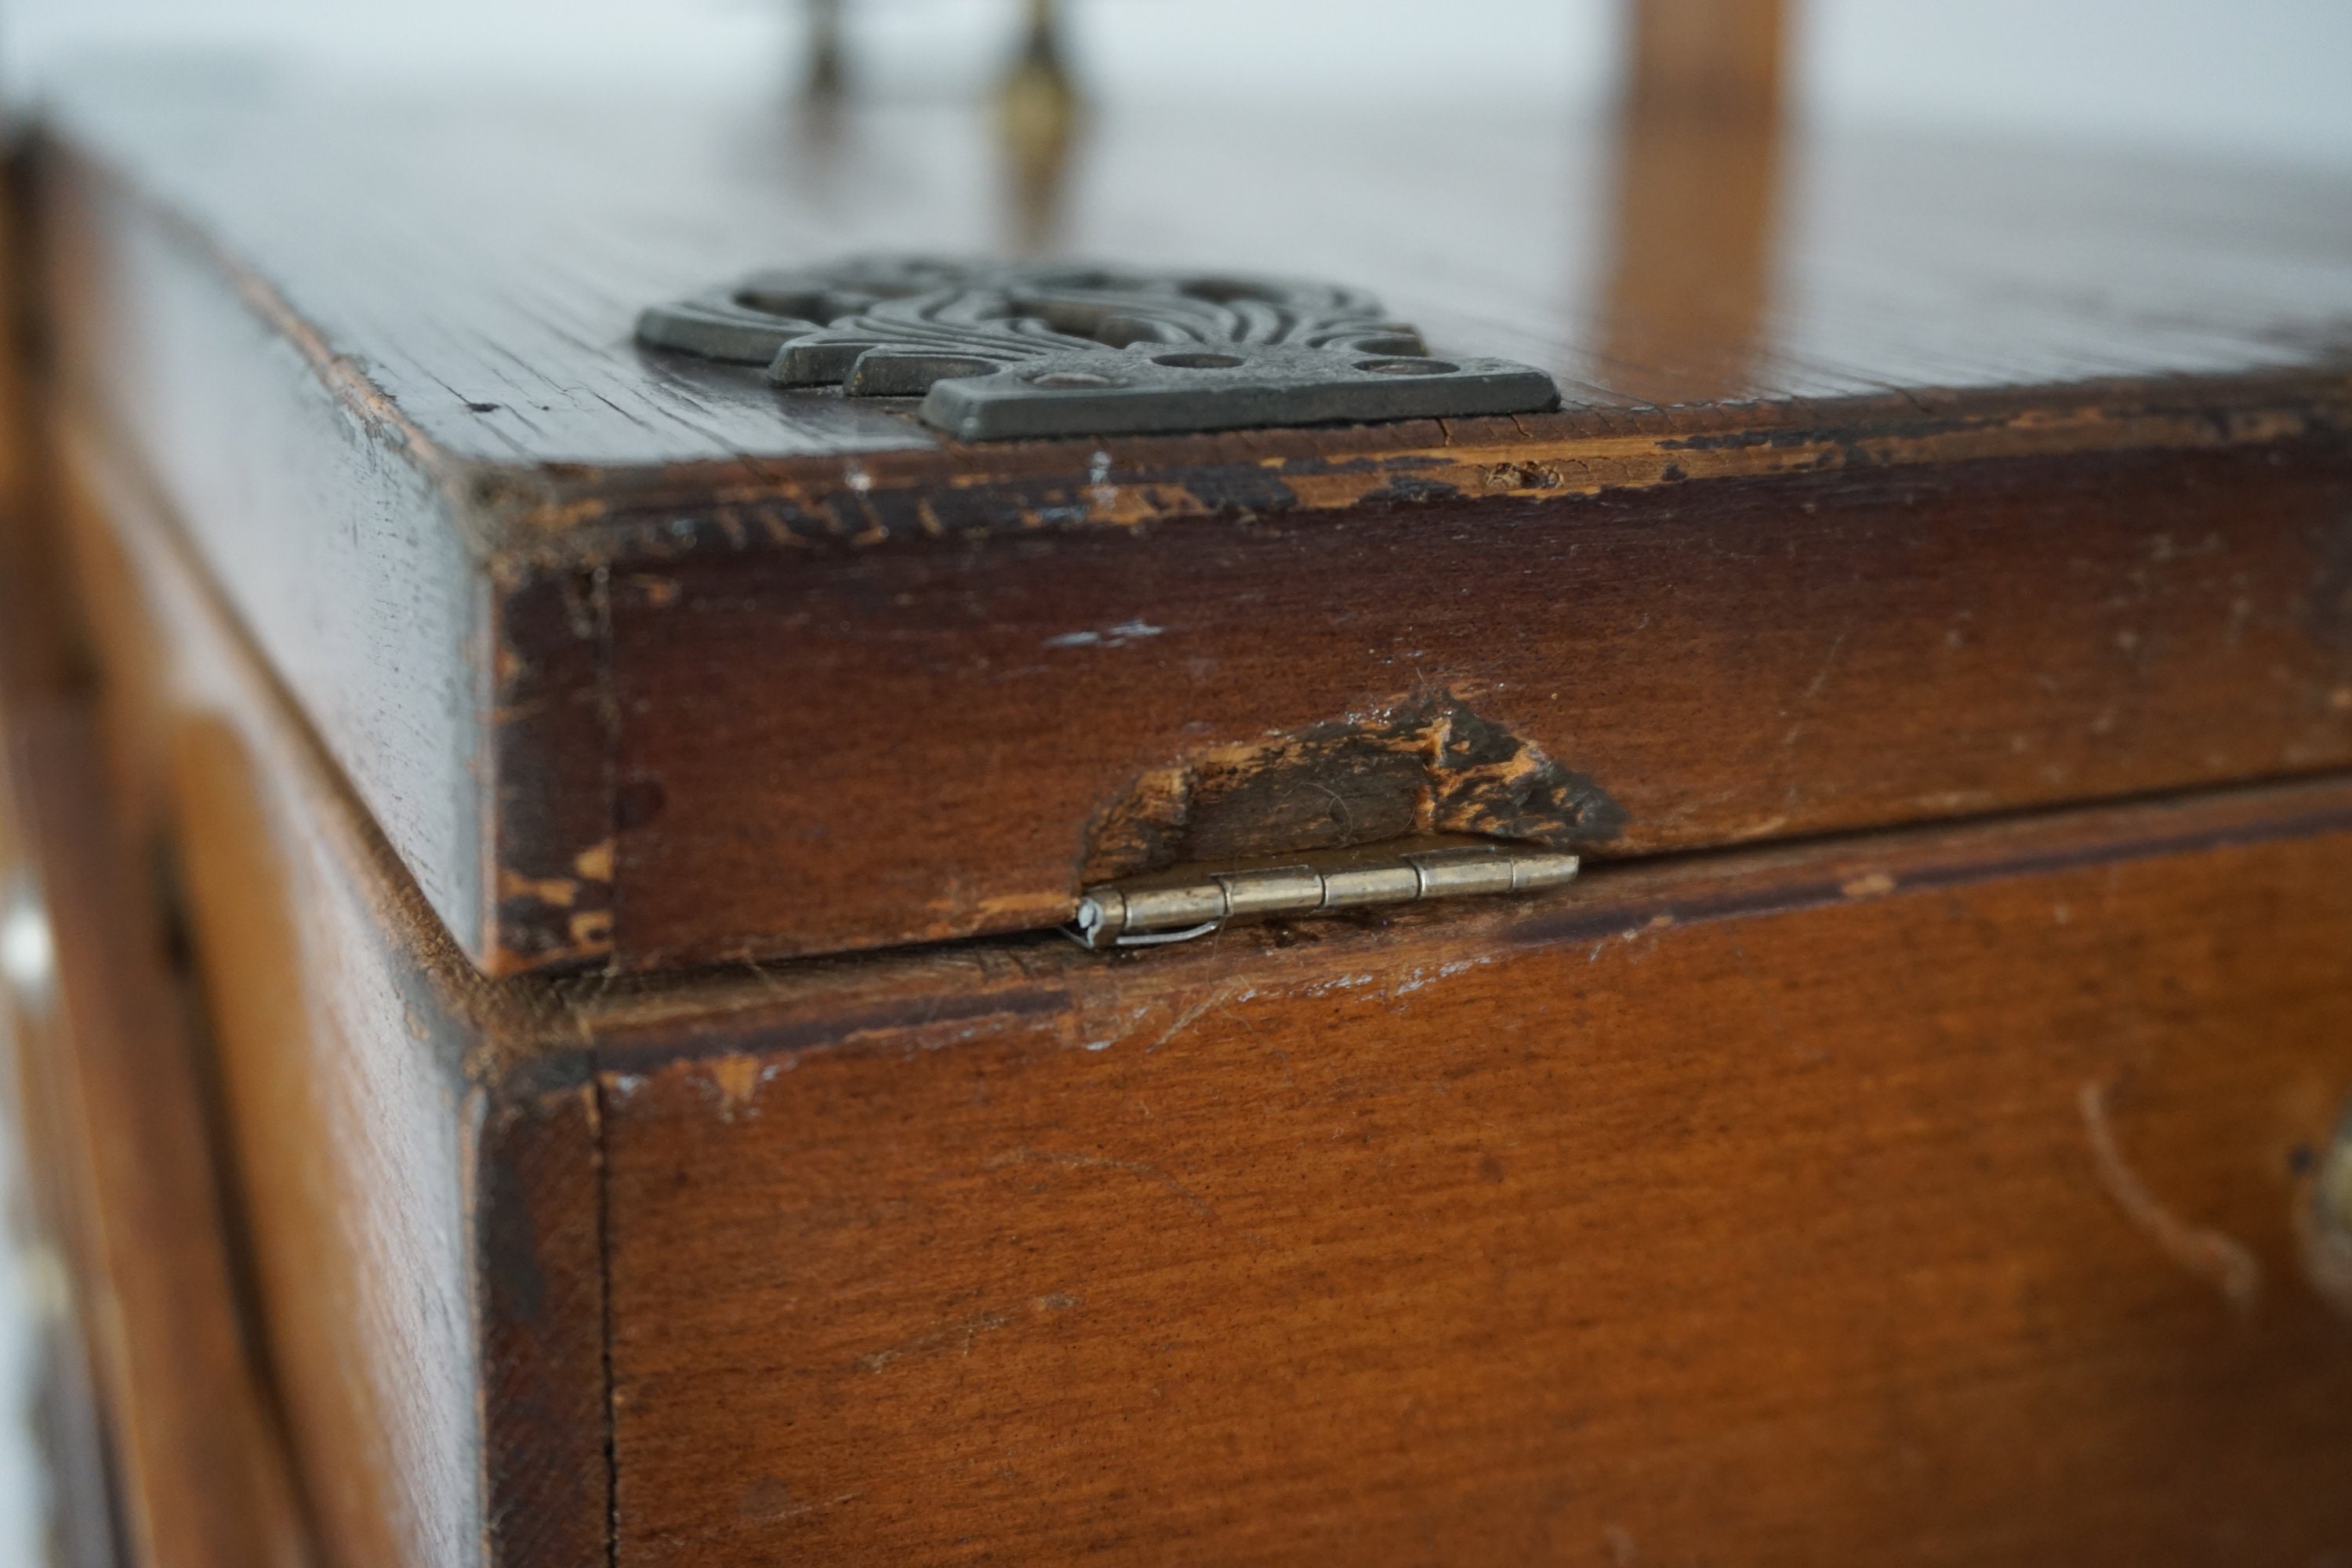 Cantilever sewing box – The Vintage Artistry